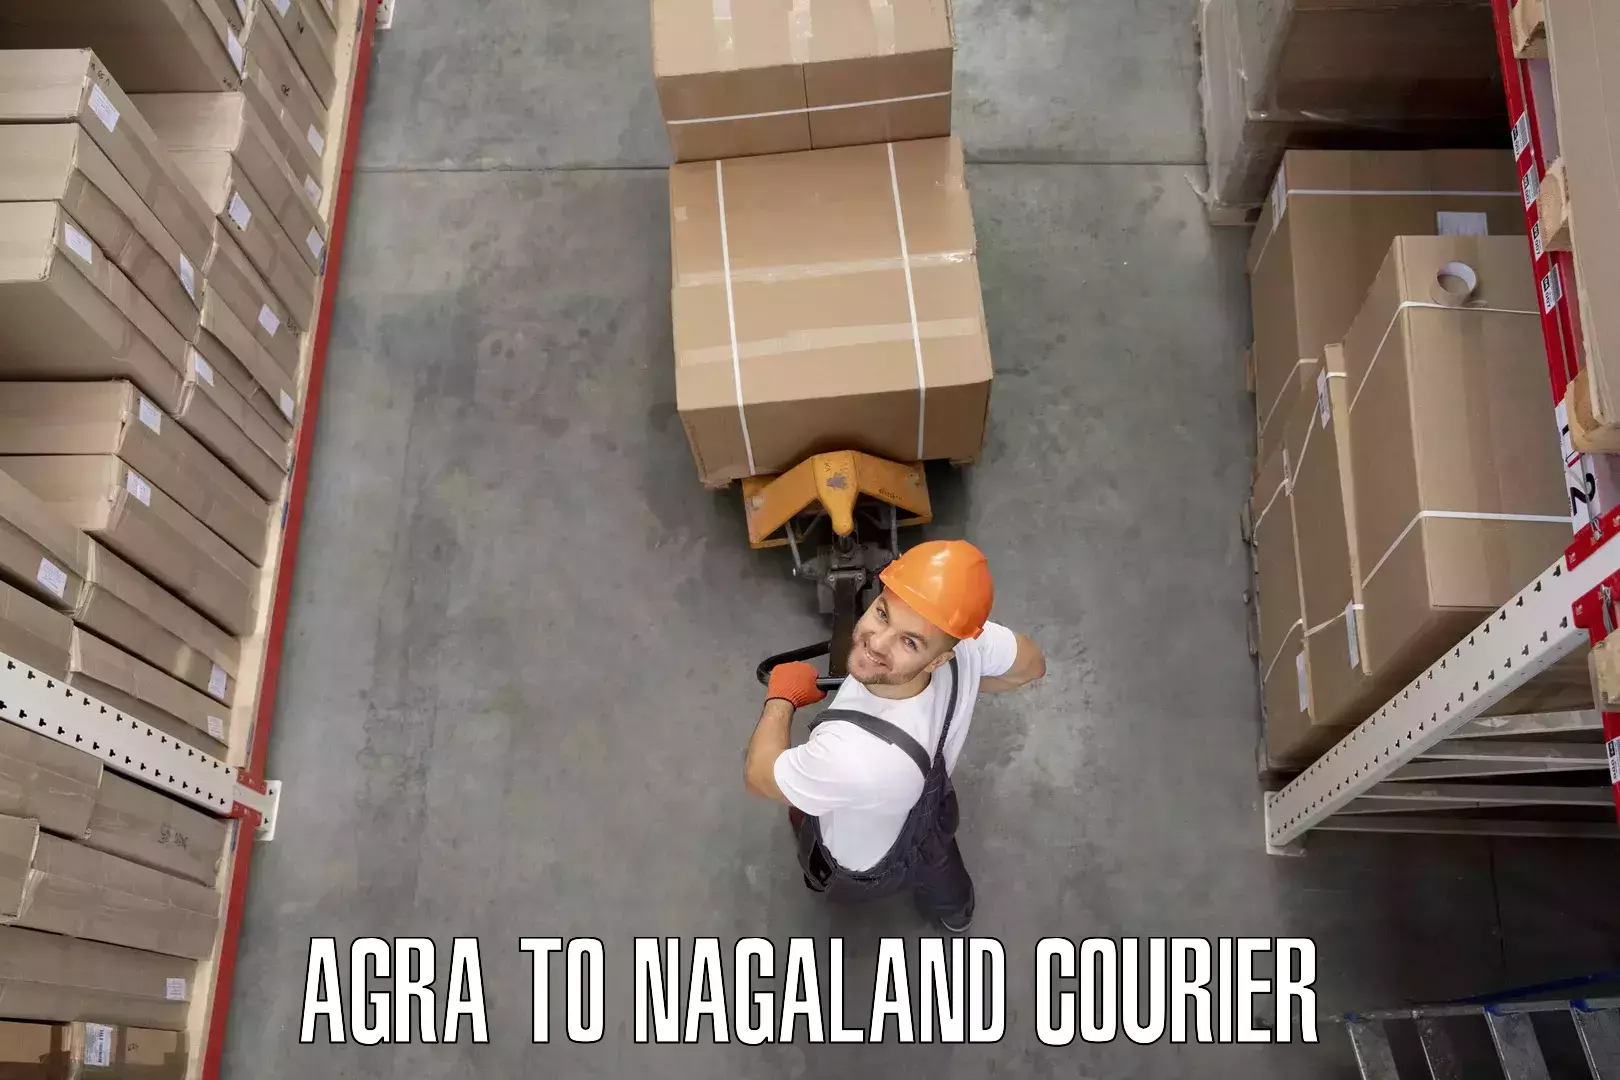 Trusted relocation experts Agra to Nagaland